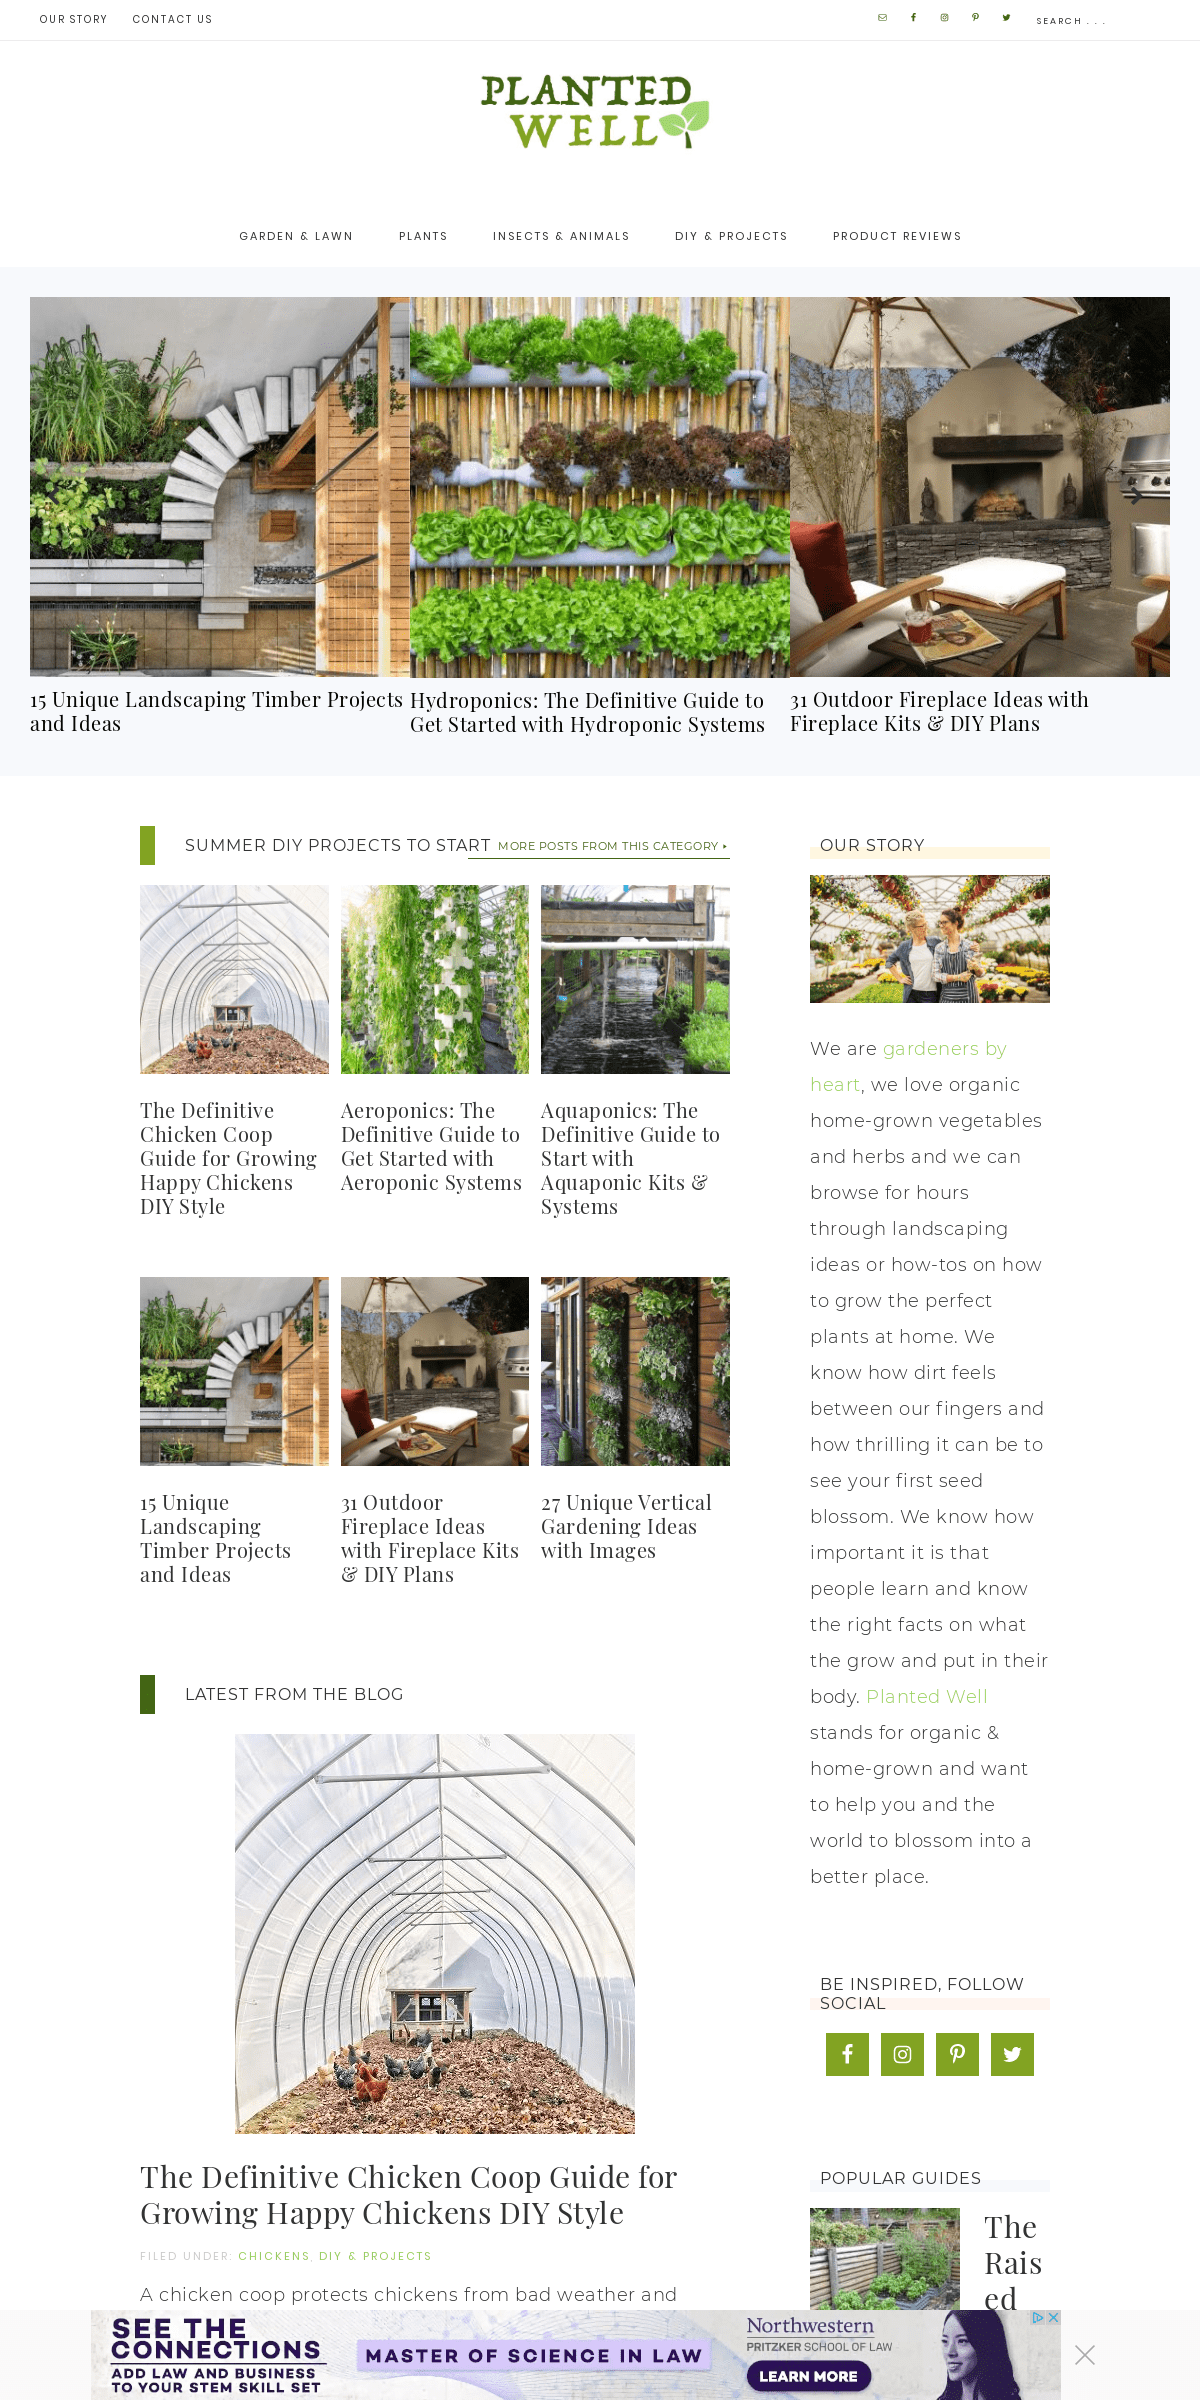 A complete backup of plantedwell.com